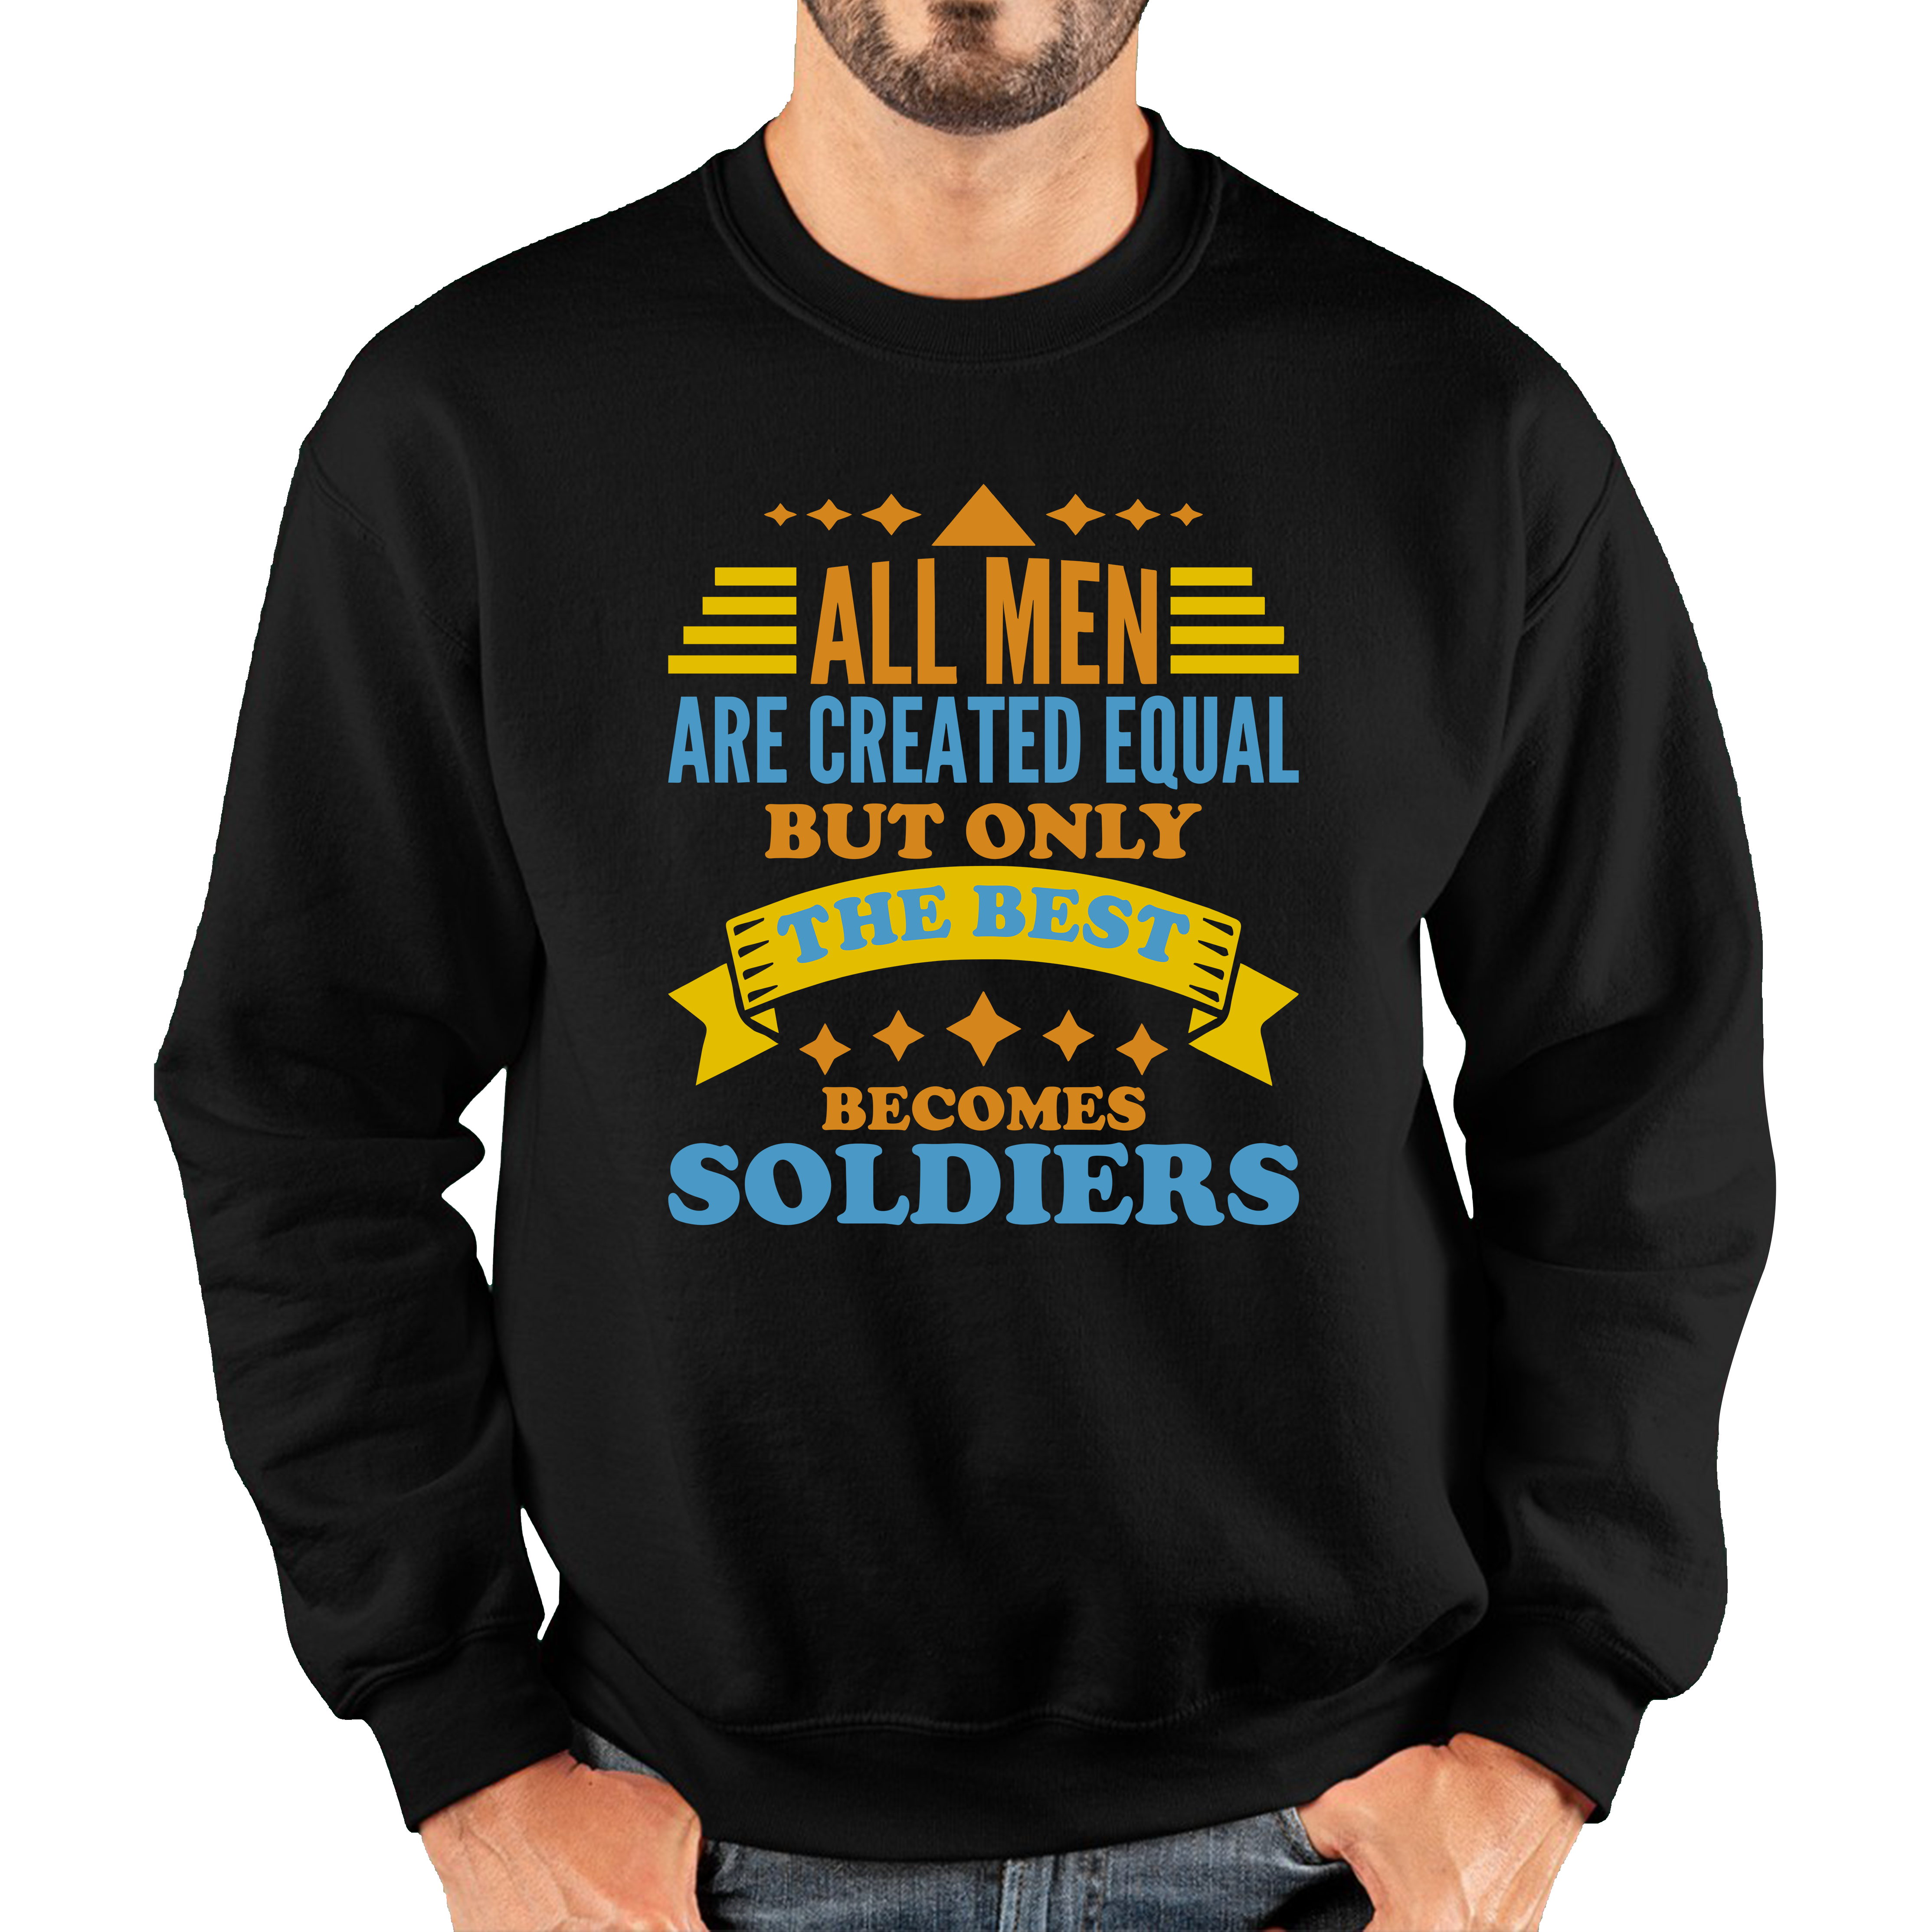 All Men Are Created Equal But Only The Best Becomes Soldiers Unisex Sweatshirt